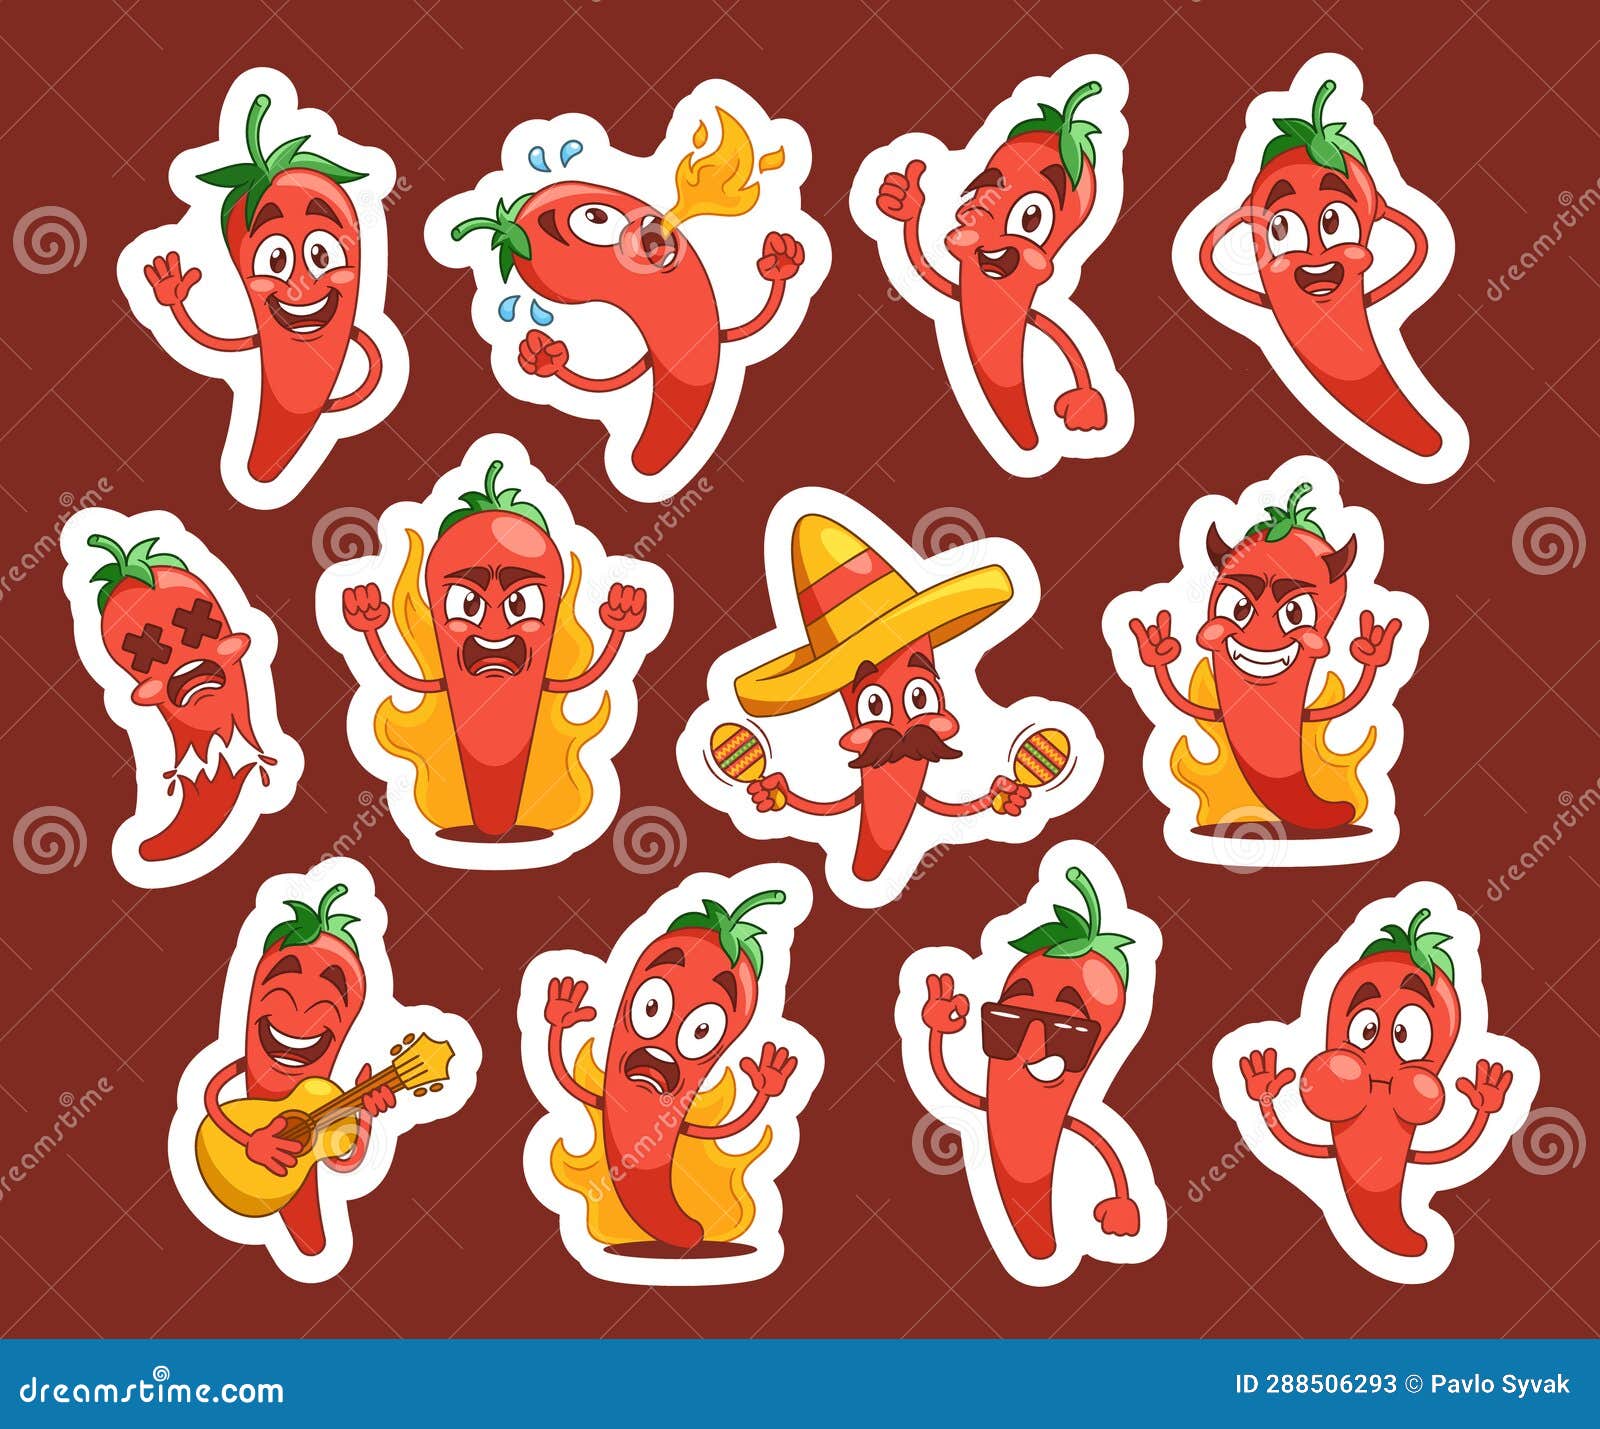 set of stickers cartoon hot chili pepper characters. red jalapeno or guindilla mexican personages  